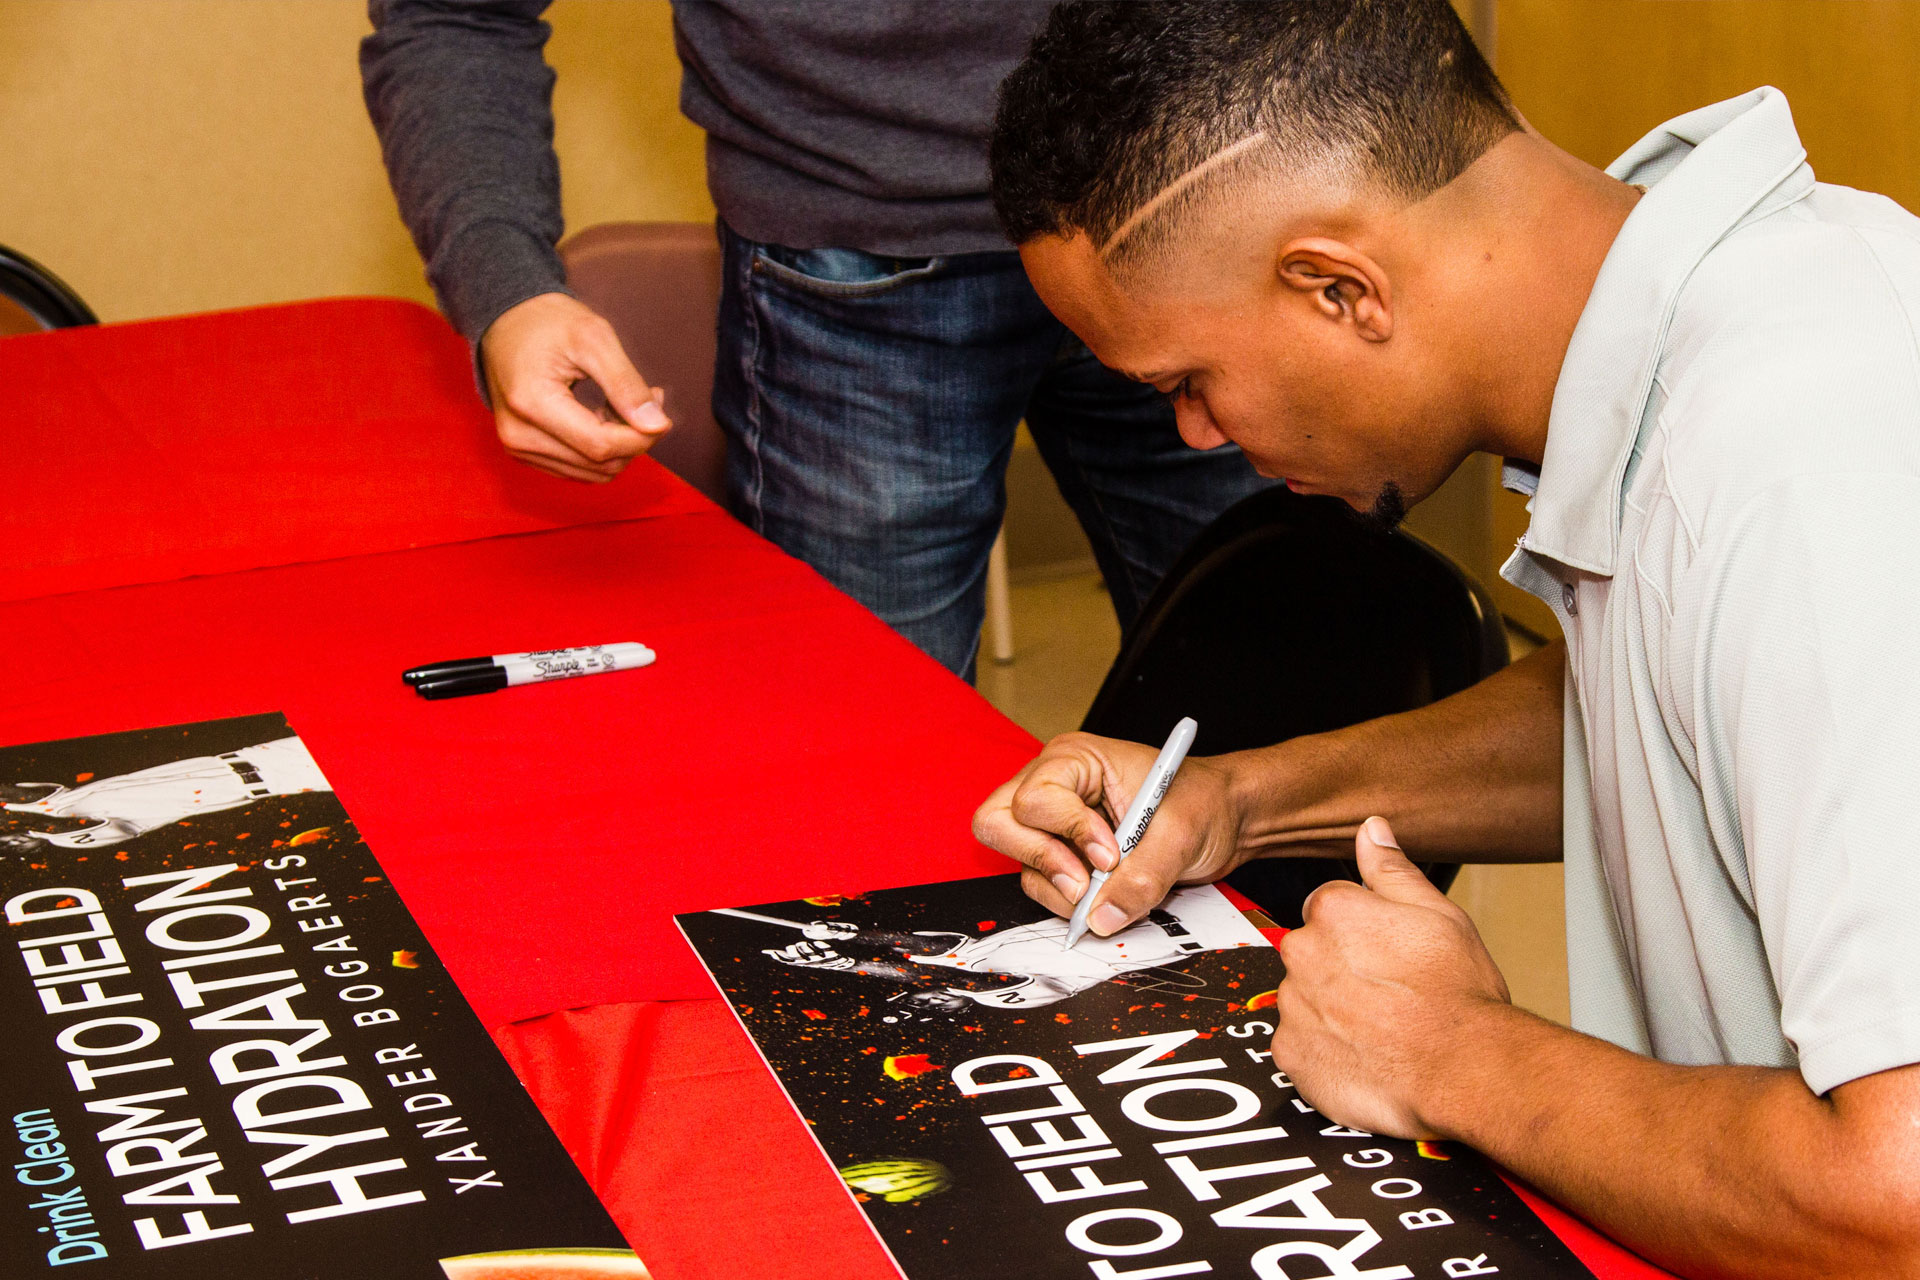 Xander Bogaerts Signs Poster for WTRMLN WTR at Stop N Shop Appearance